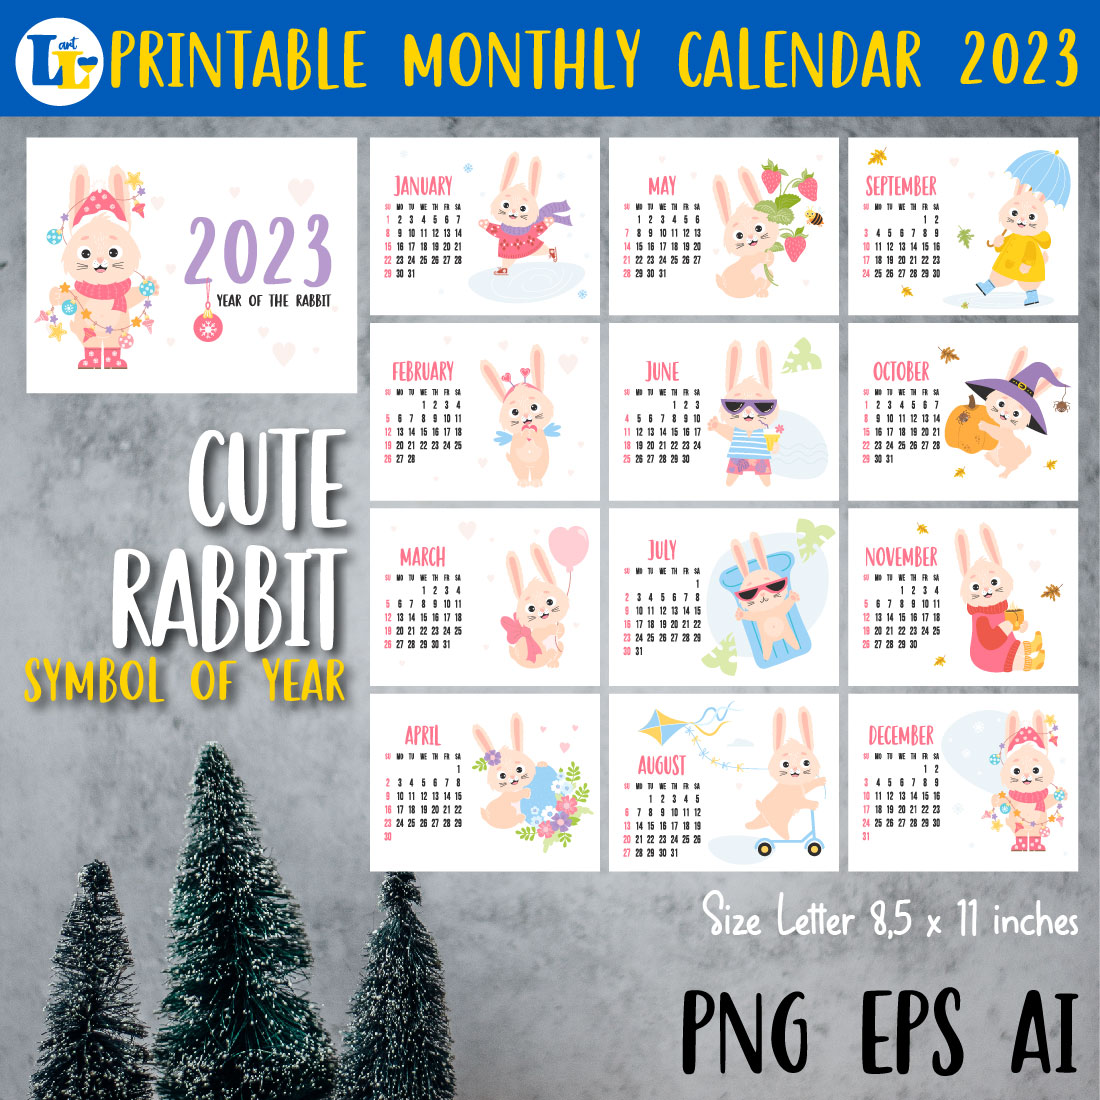 Printable Monthly Template Calendar 2023 cover image.